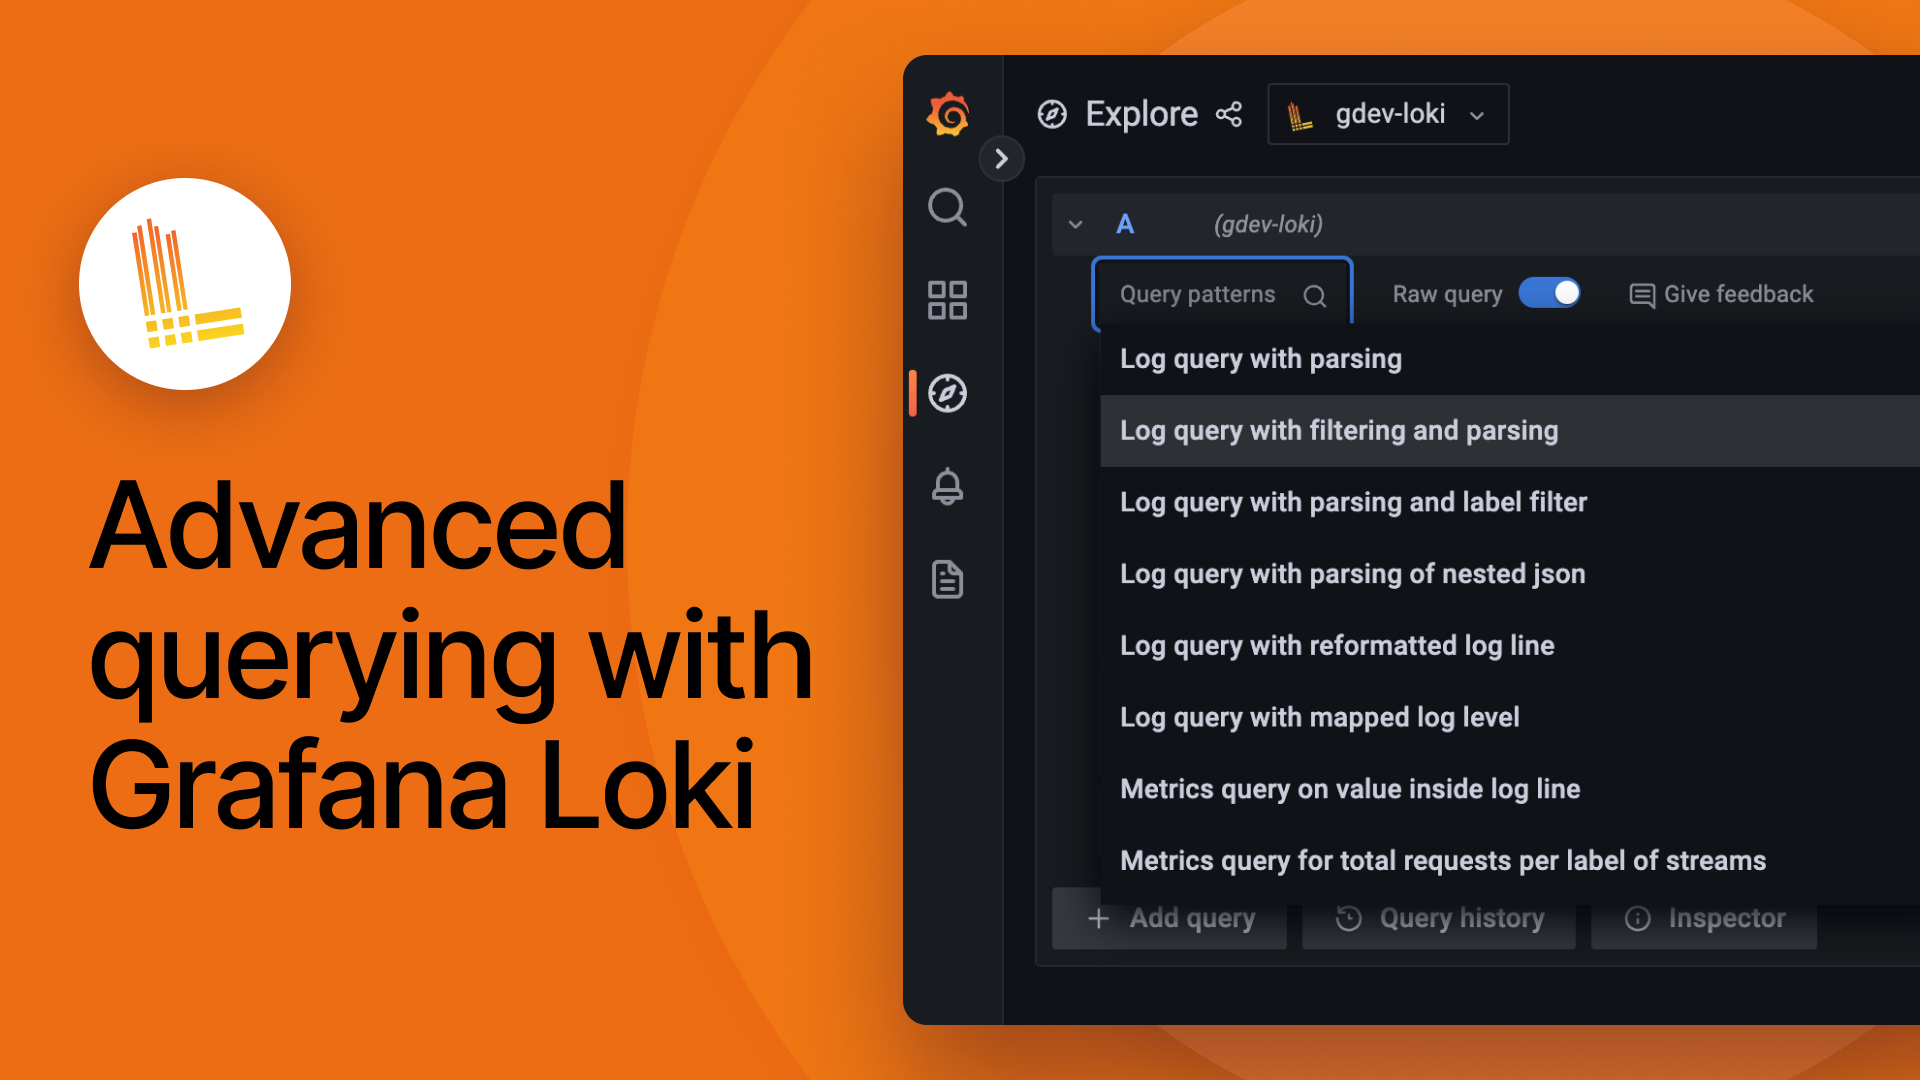 The title card for the Advanced querying with Grafana Loki webinar, including the title of the webinar.